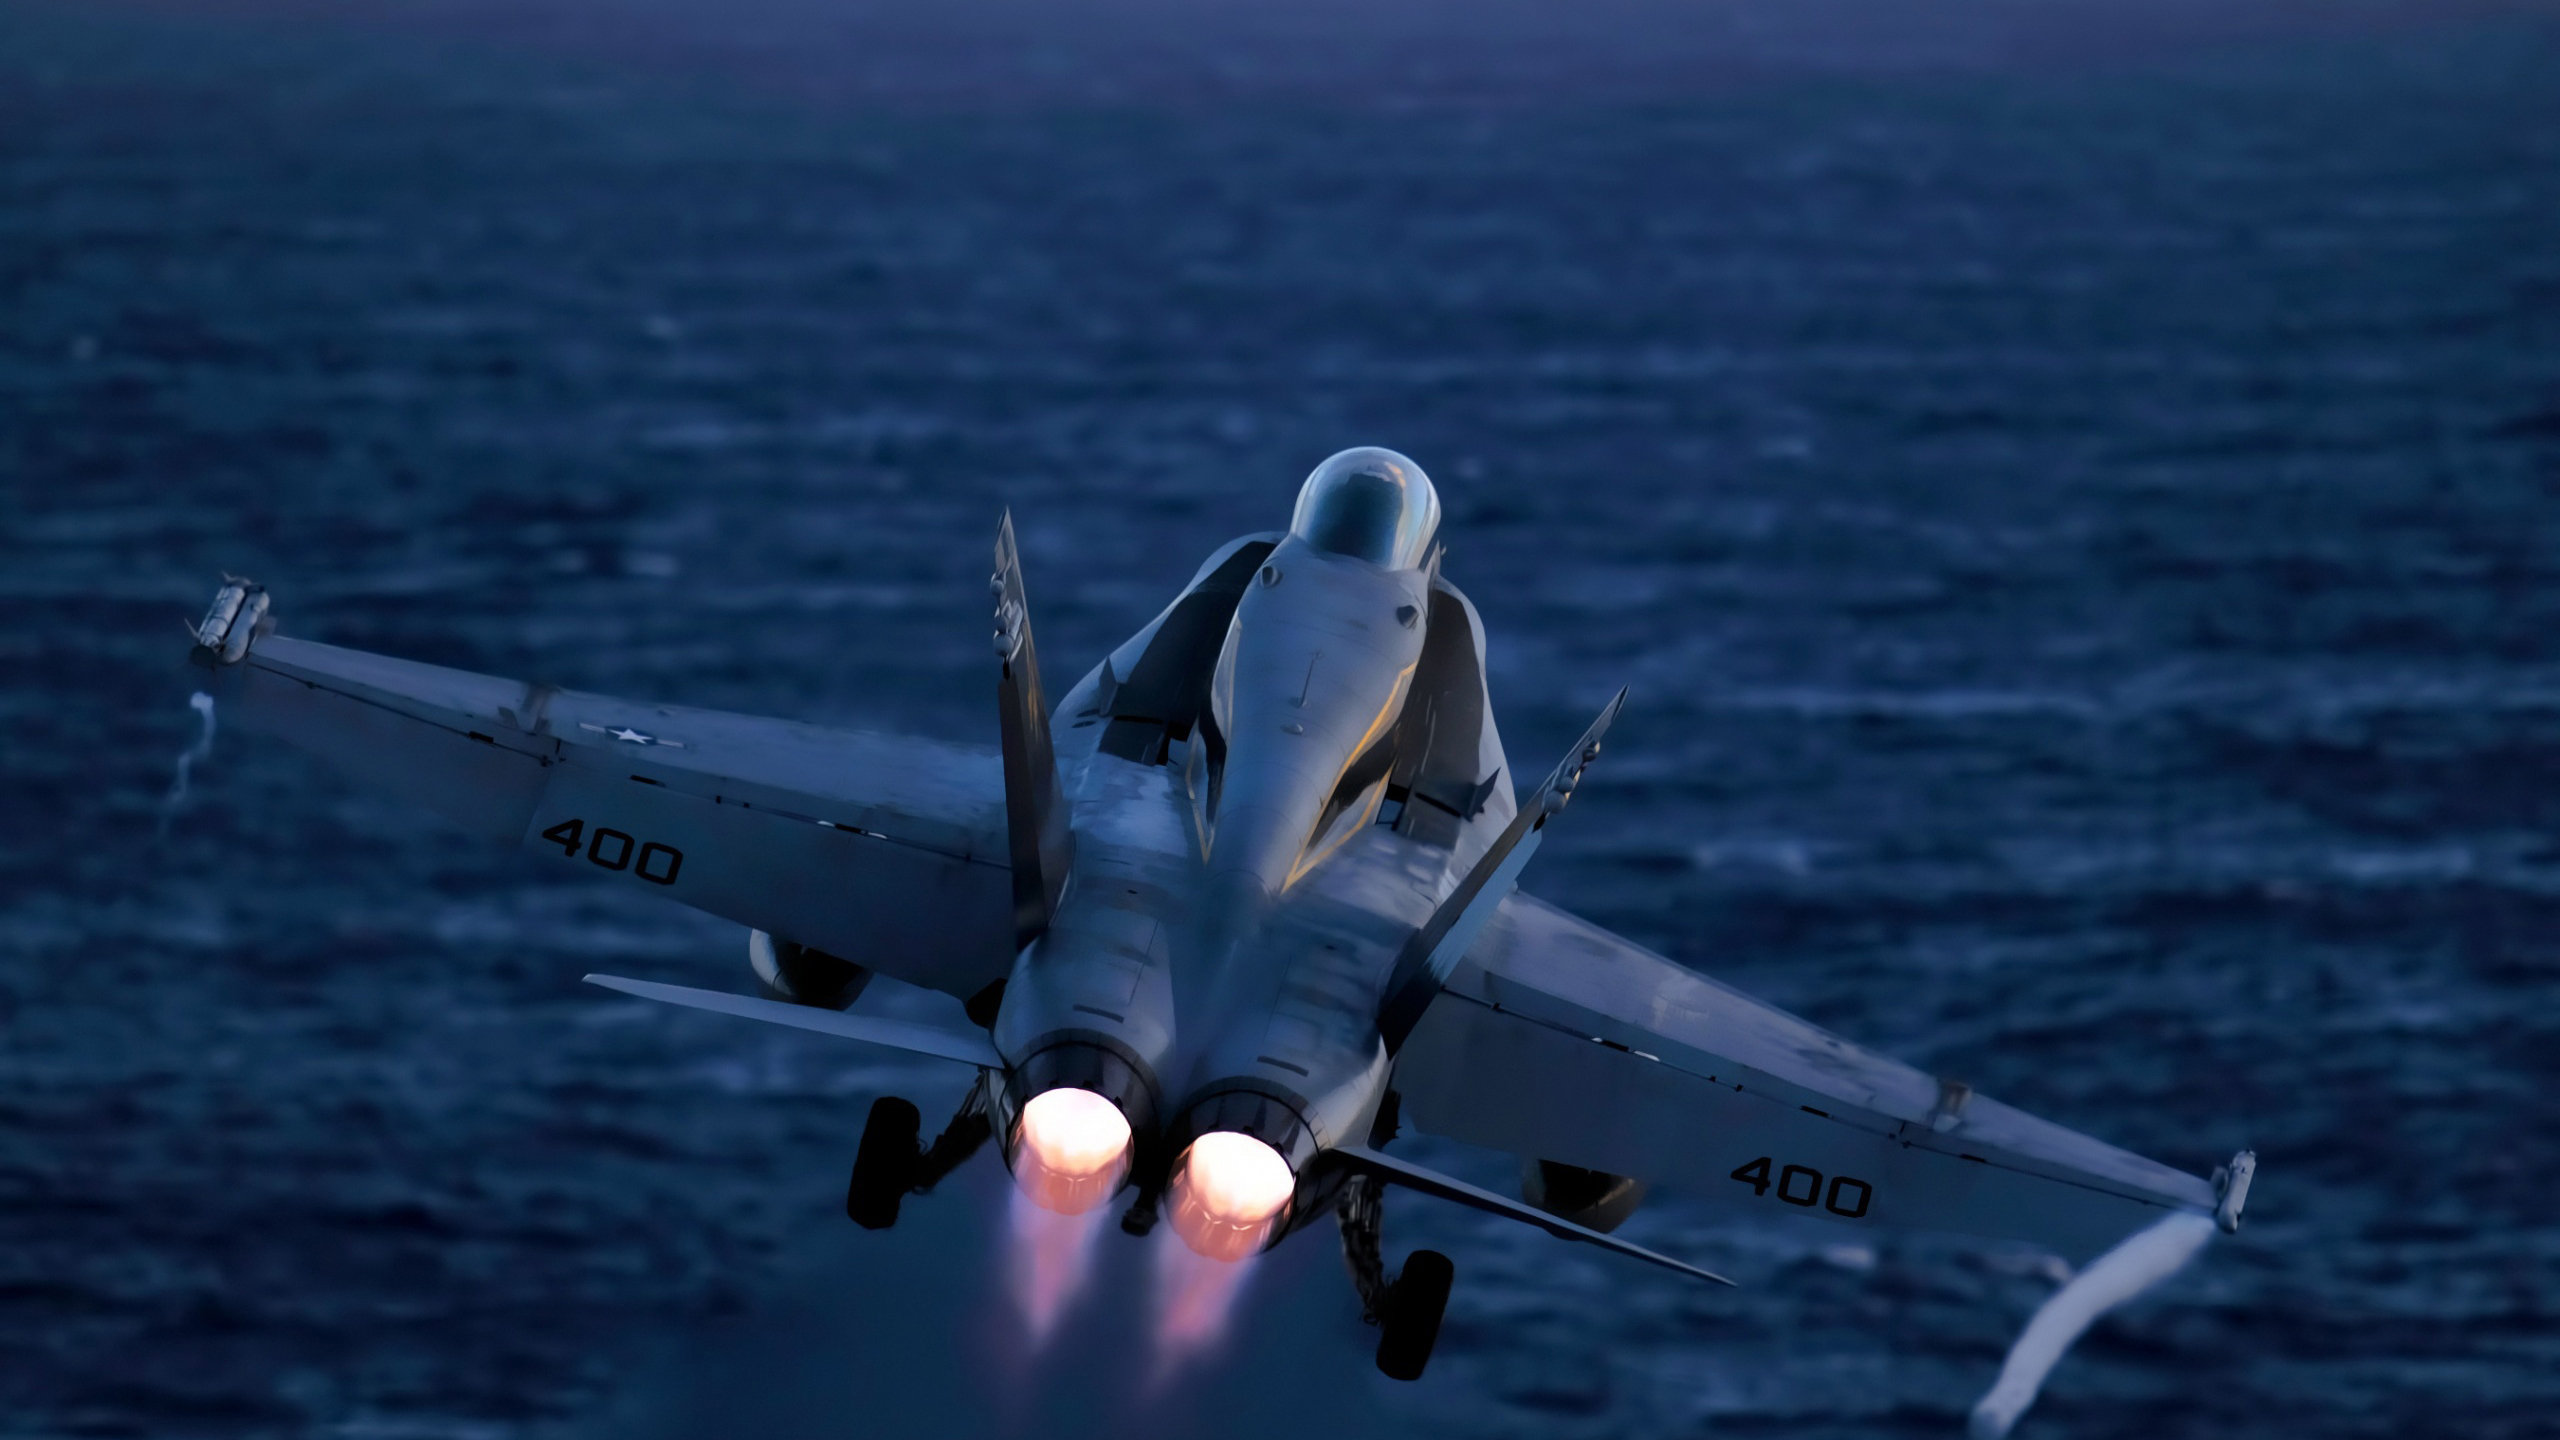 General 2560x1440 jet fighter military aircraft weapon FA-18 McDonnell Douglas Boeing American aircraft